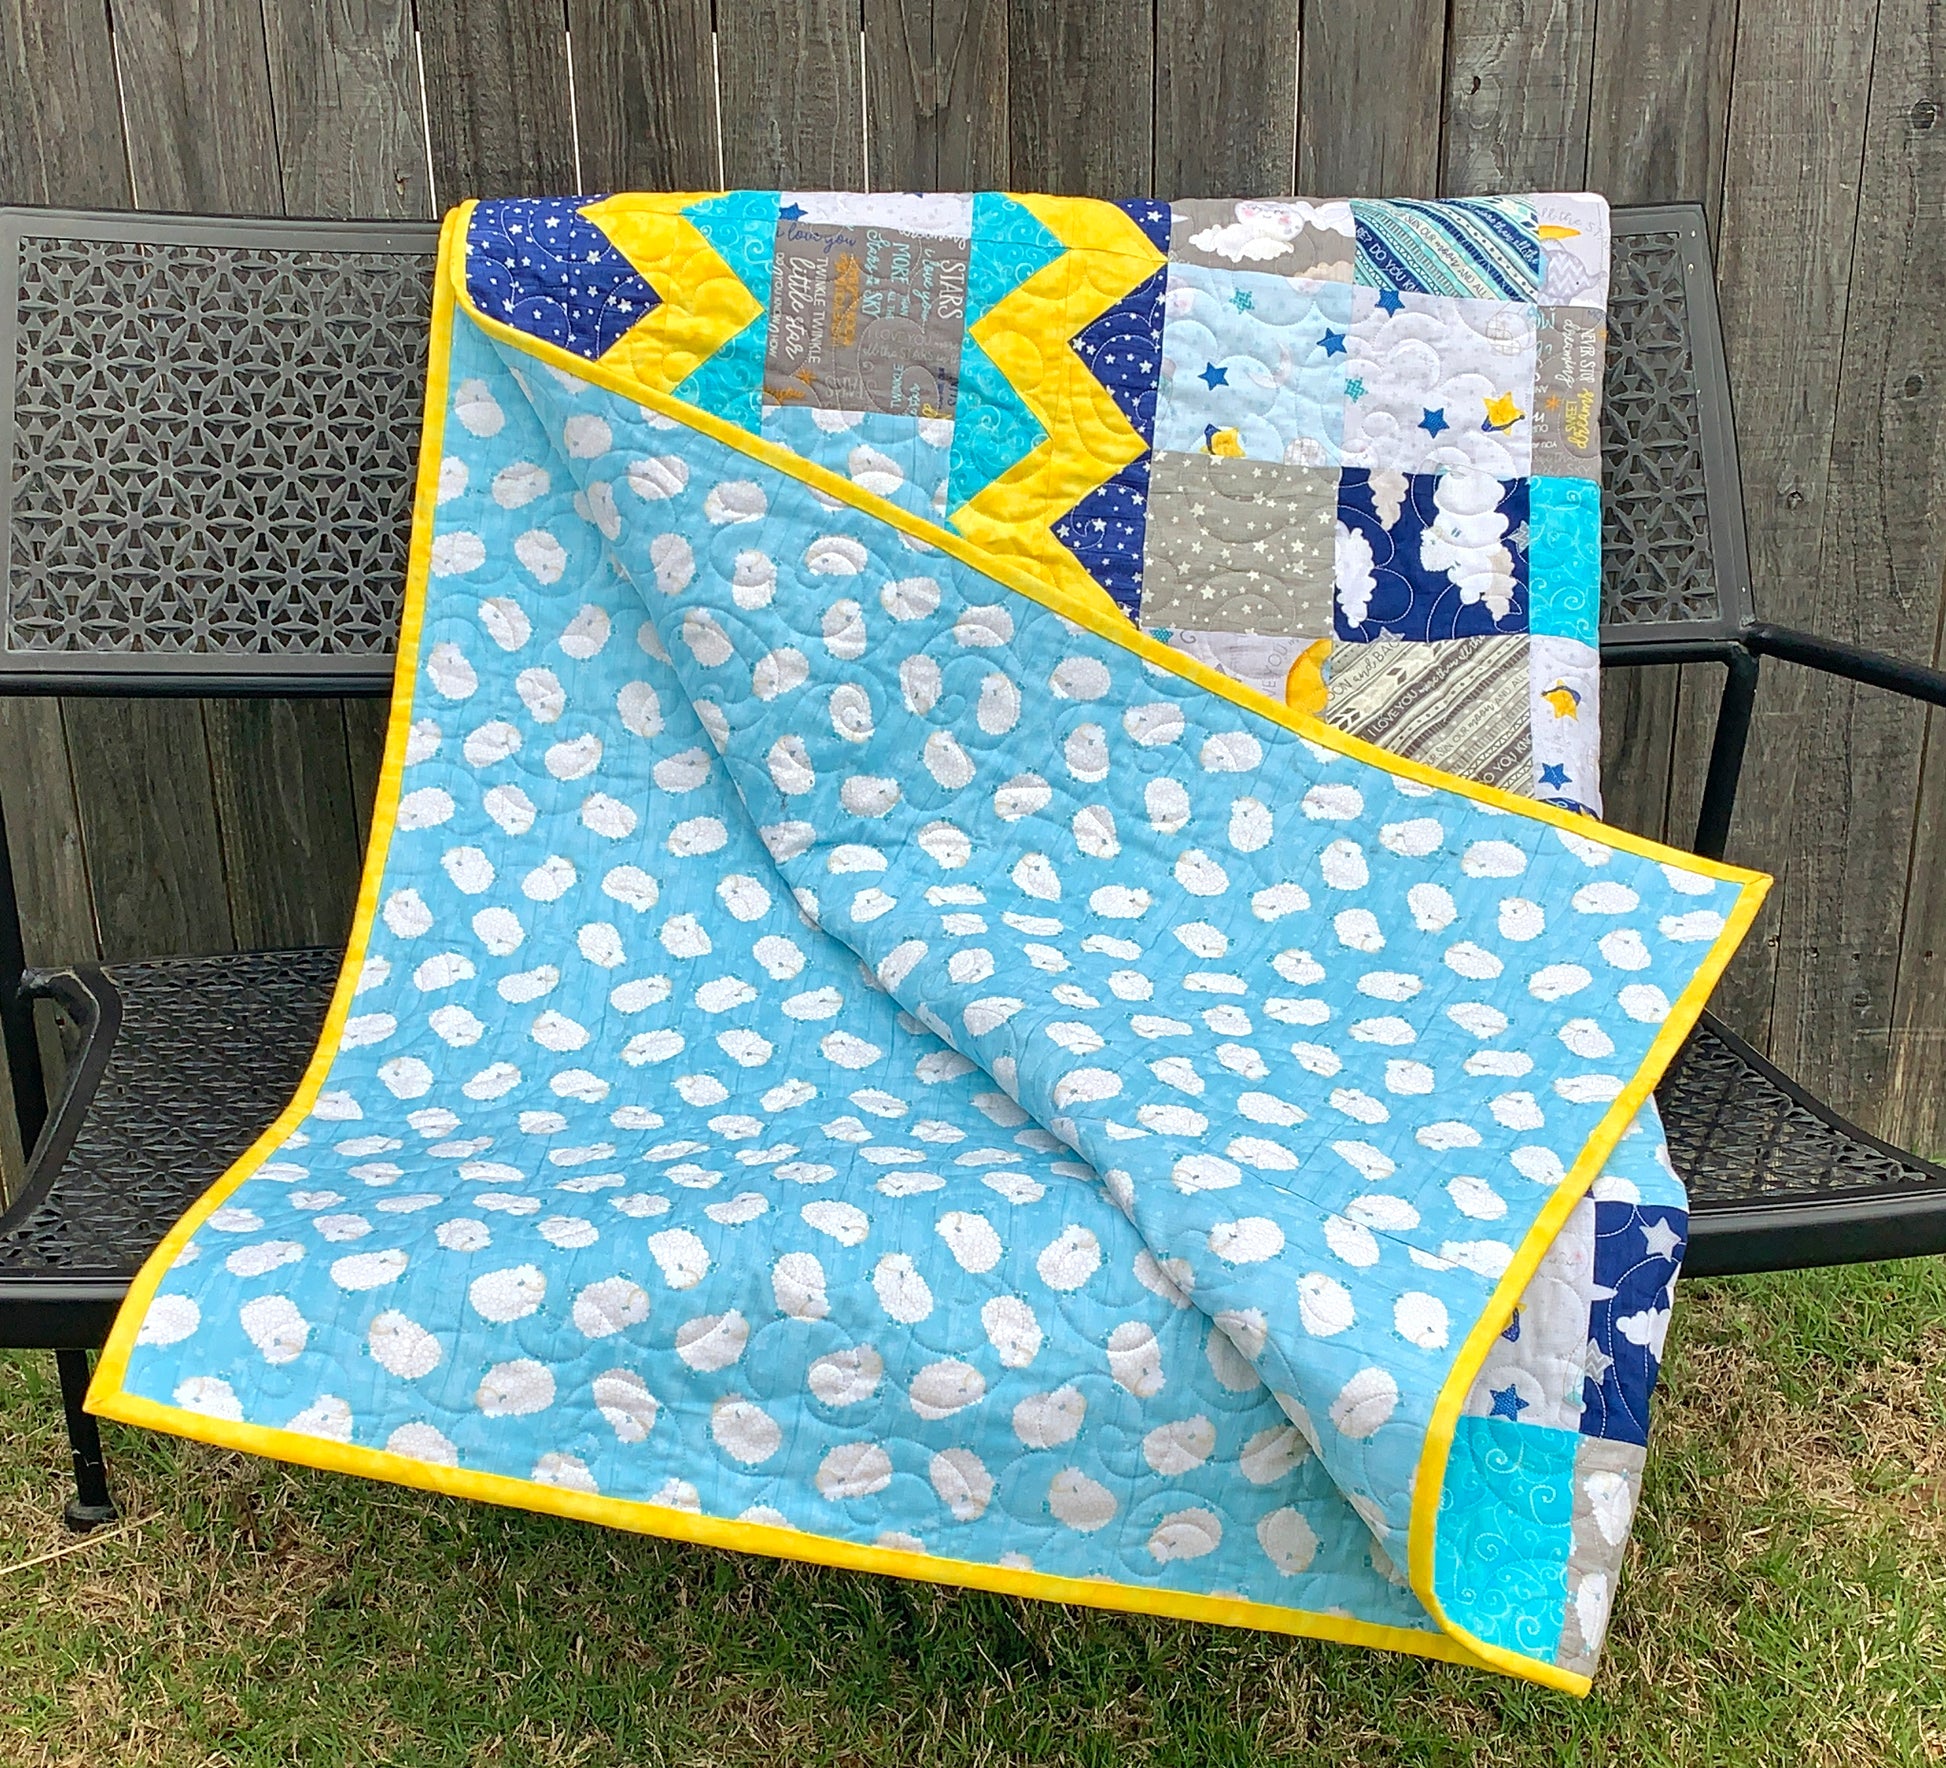 Blue, yellow, teal and gray patchwork baby or toddler quilt with four zig-zag rows accenting the patchwork blocks. Quilt is shown folded up with teal and white backing fabric showing.